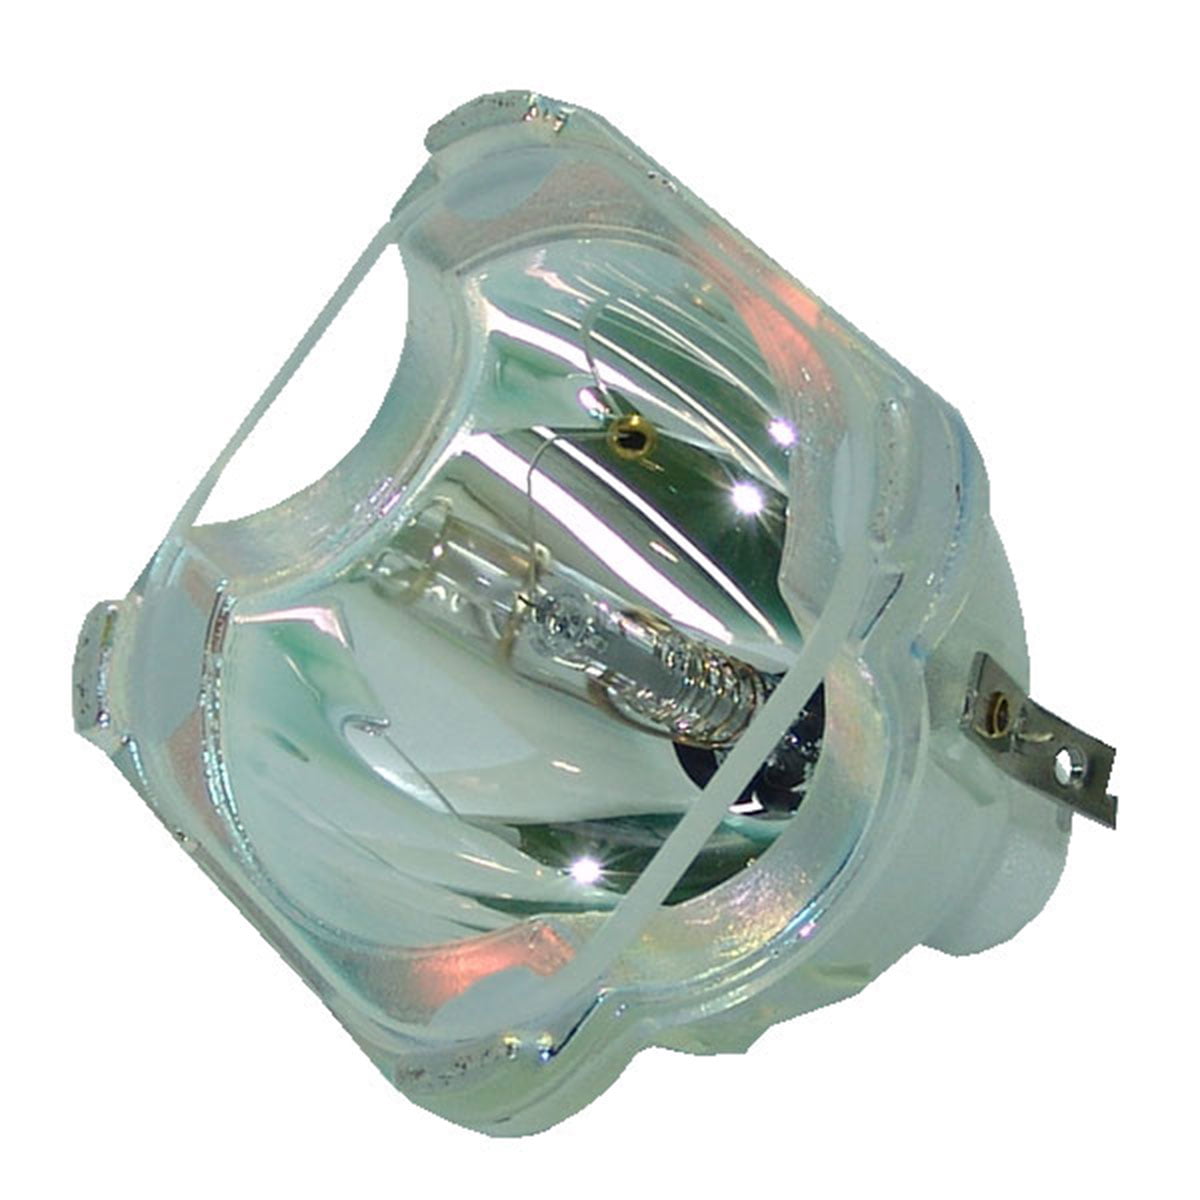 Mitsubishi WD-65831 TV Replacement Lamp with Housing